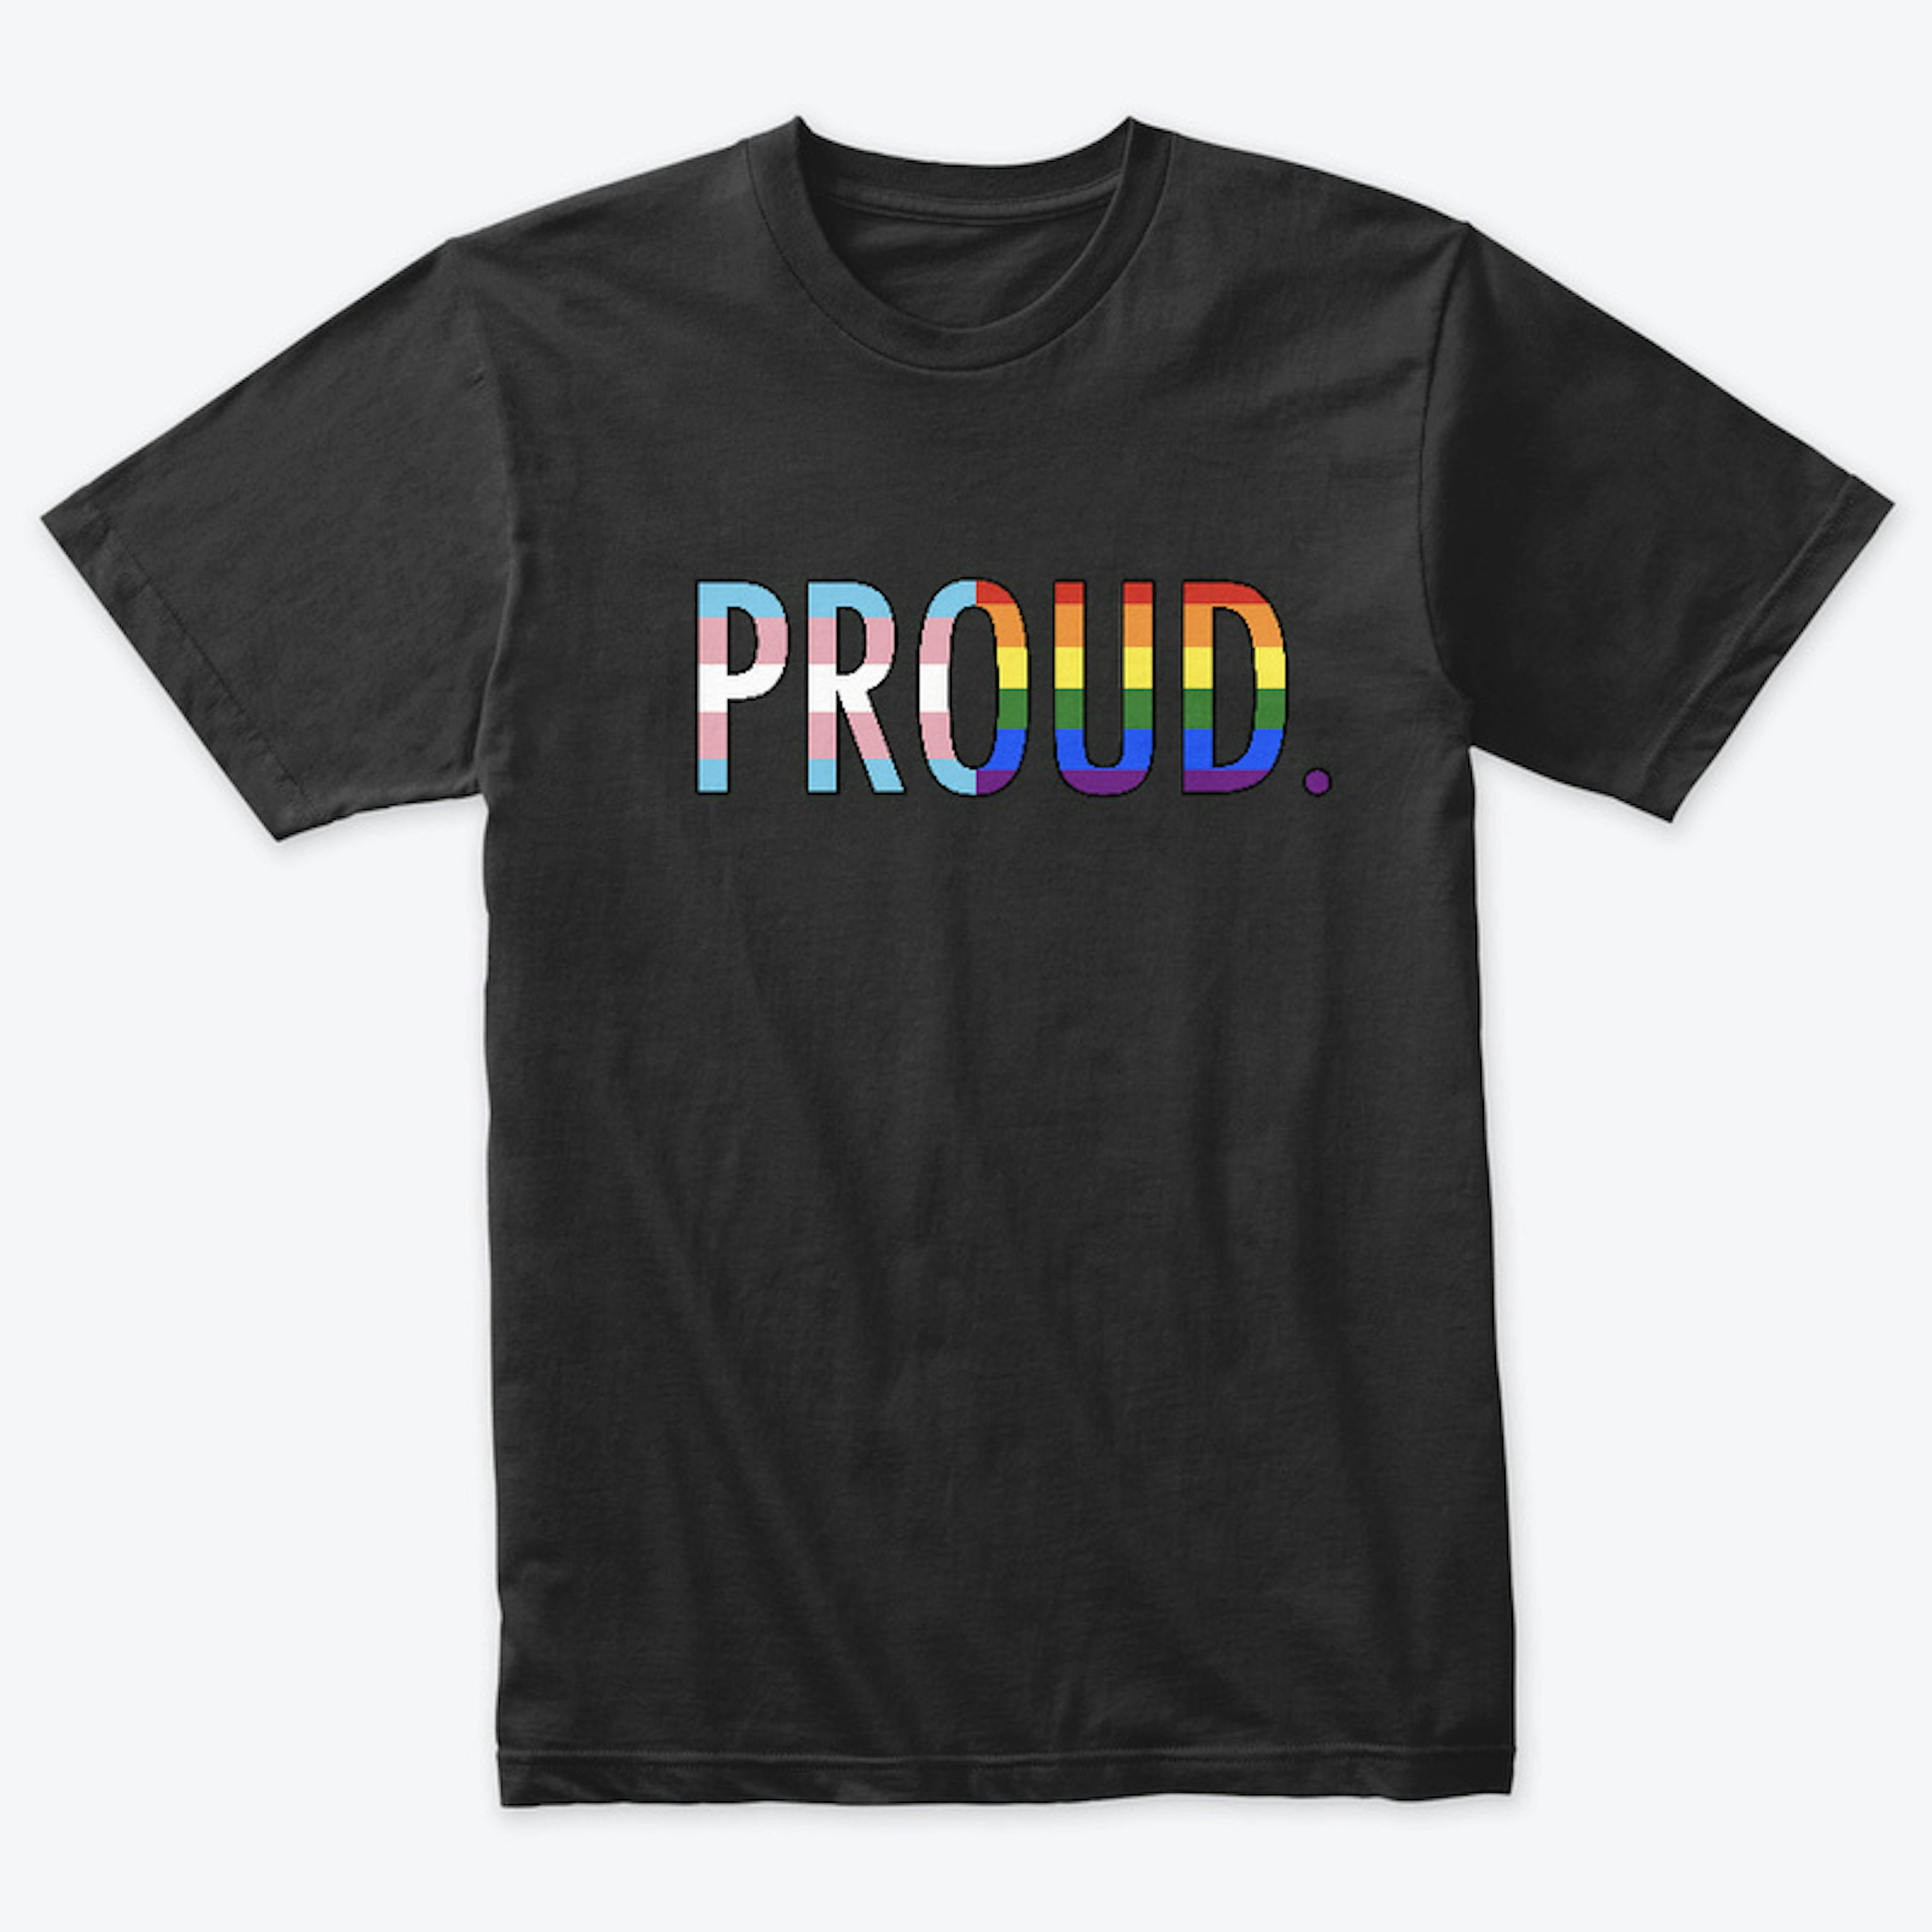 Proud. -  Trans and Queer